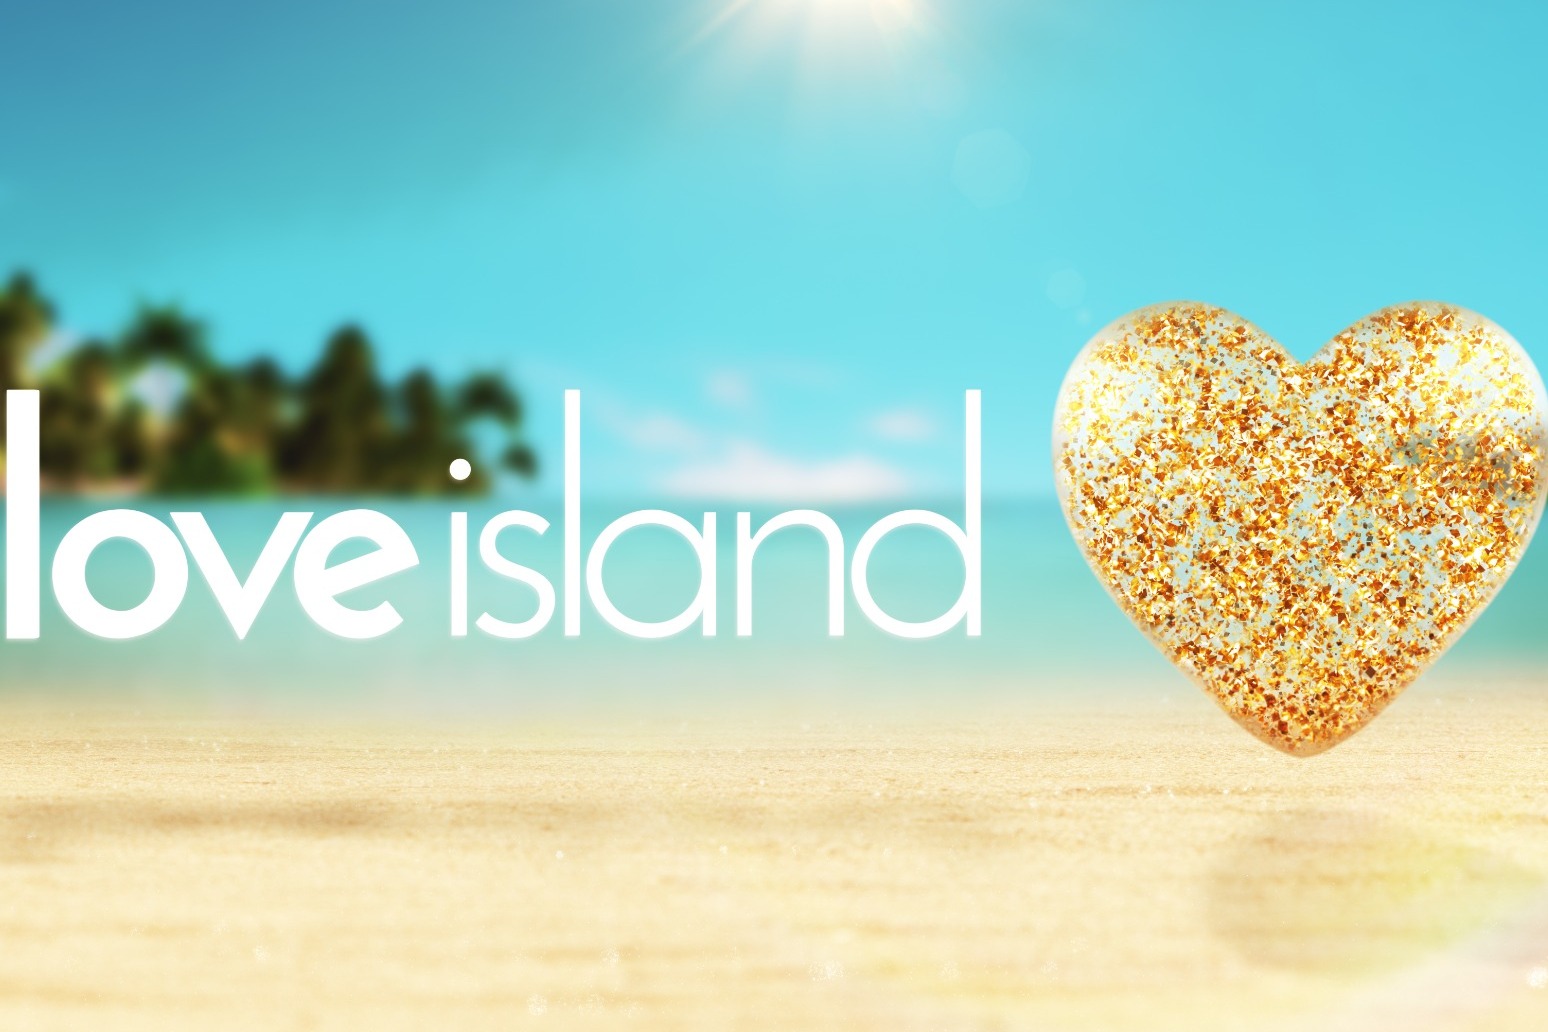 Love Island and Matt Hancock top list of 2022’s most complained about TV events 